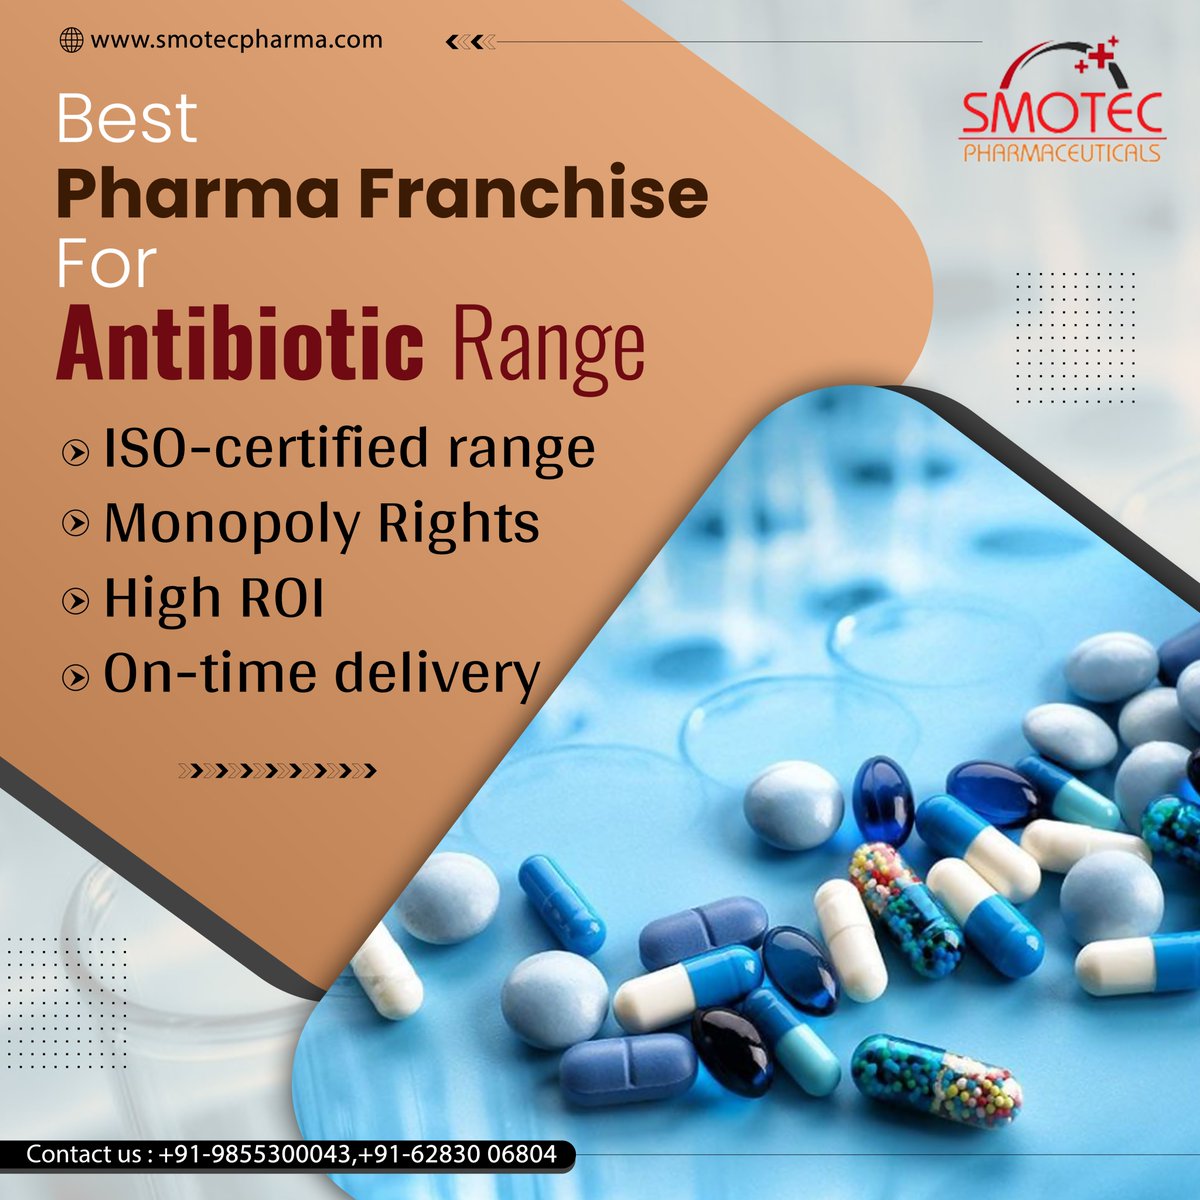 Best Pharma Franchise For Antibiotic Range
✅ISO-certified range
✅Monopoly Rights
✅High ROI
✅On-time delivery

Call us at +91-9855300043 for more info!
.
.
#pharmafranchisecompany #bestproducts #qualityrange #ISOCertified #pharmaceutical #antibioticrange #pharmarange